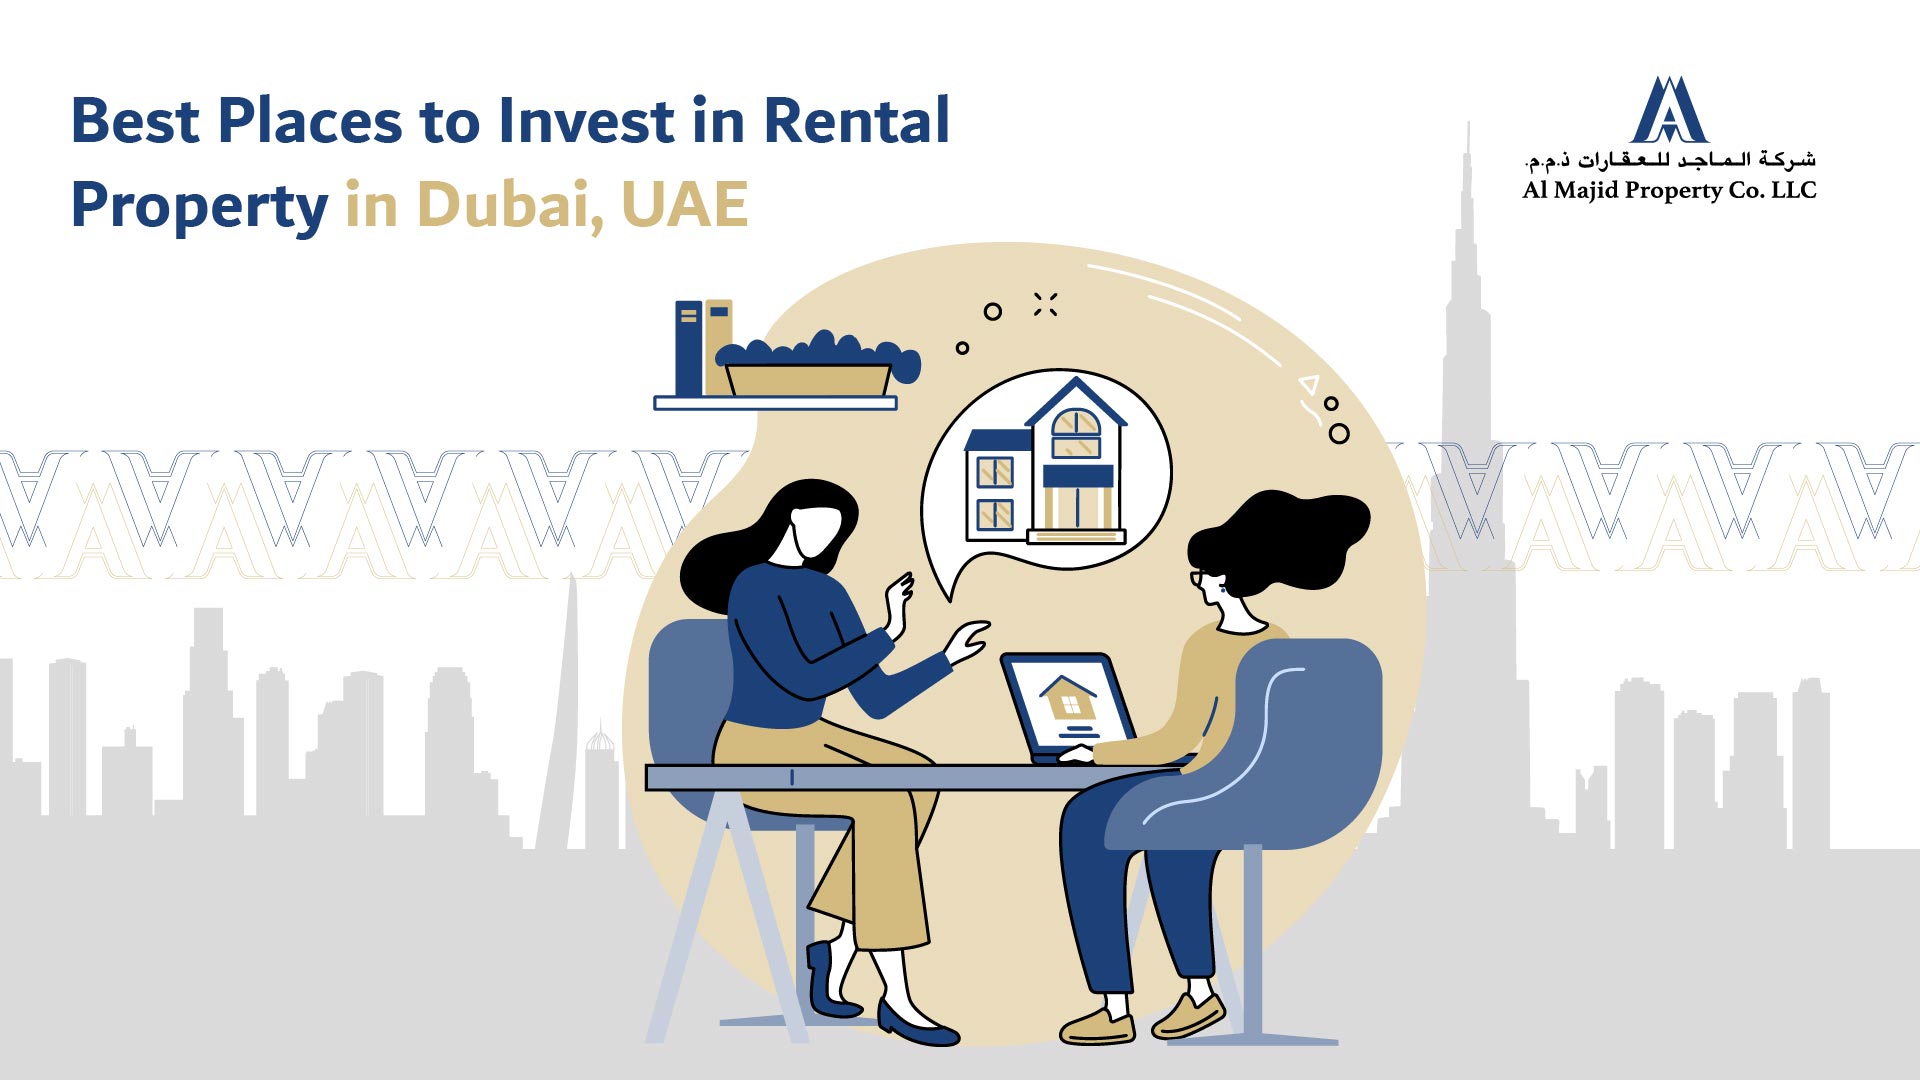 Best Places to Invest in Rental Property in Dubai